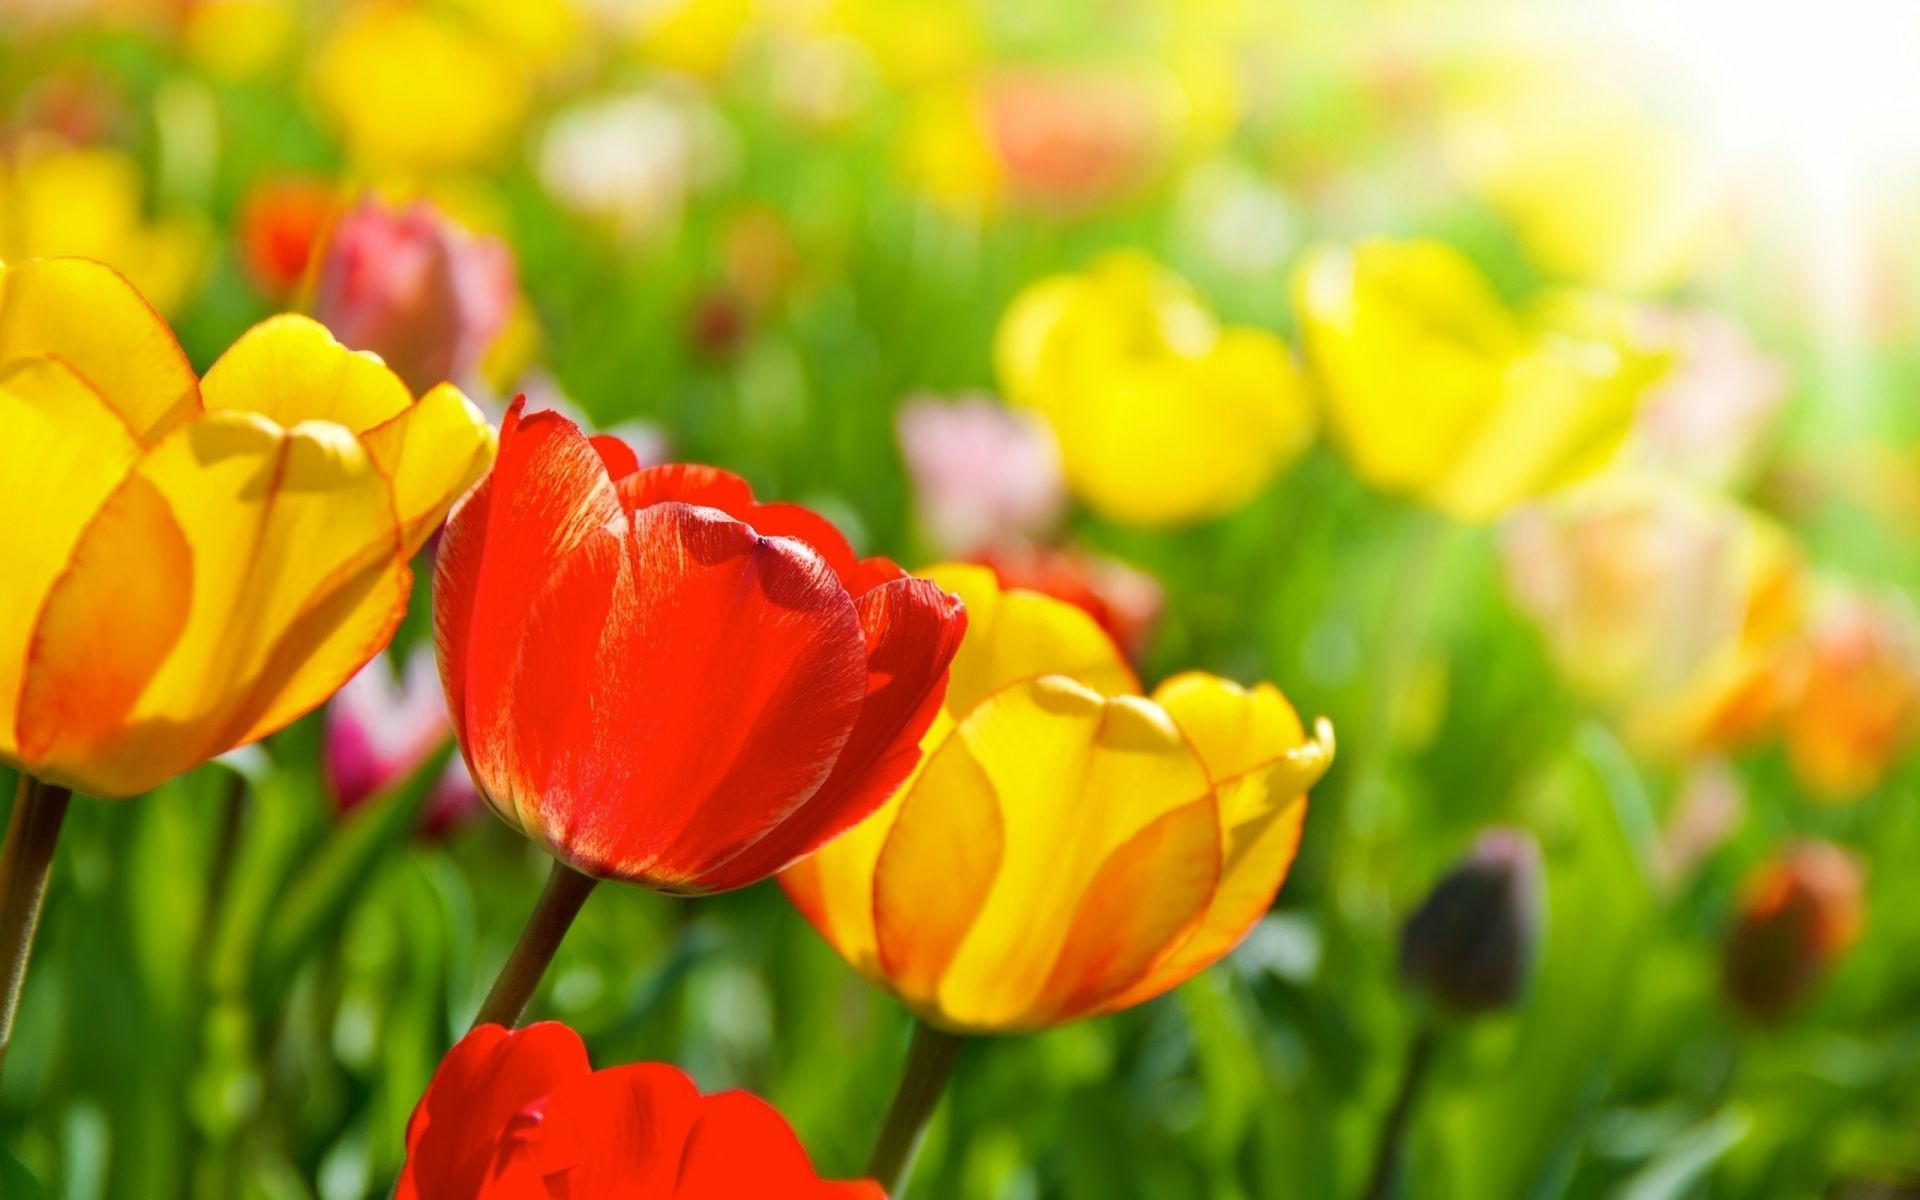 tulips tulip nature garden easter leaf flower flora field summer bright floral color season fair weather growth vibrant blooming grass petal